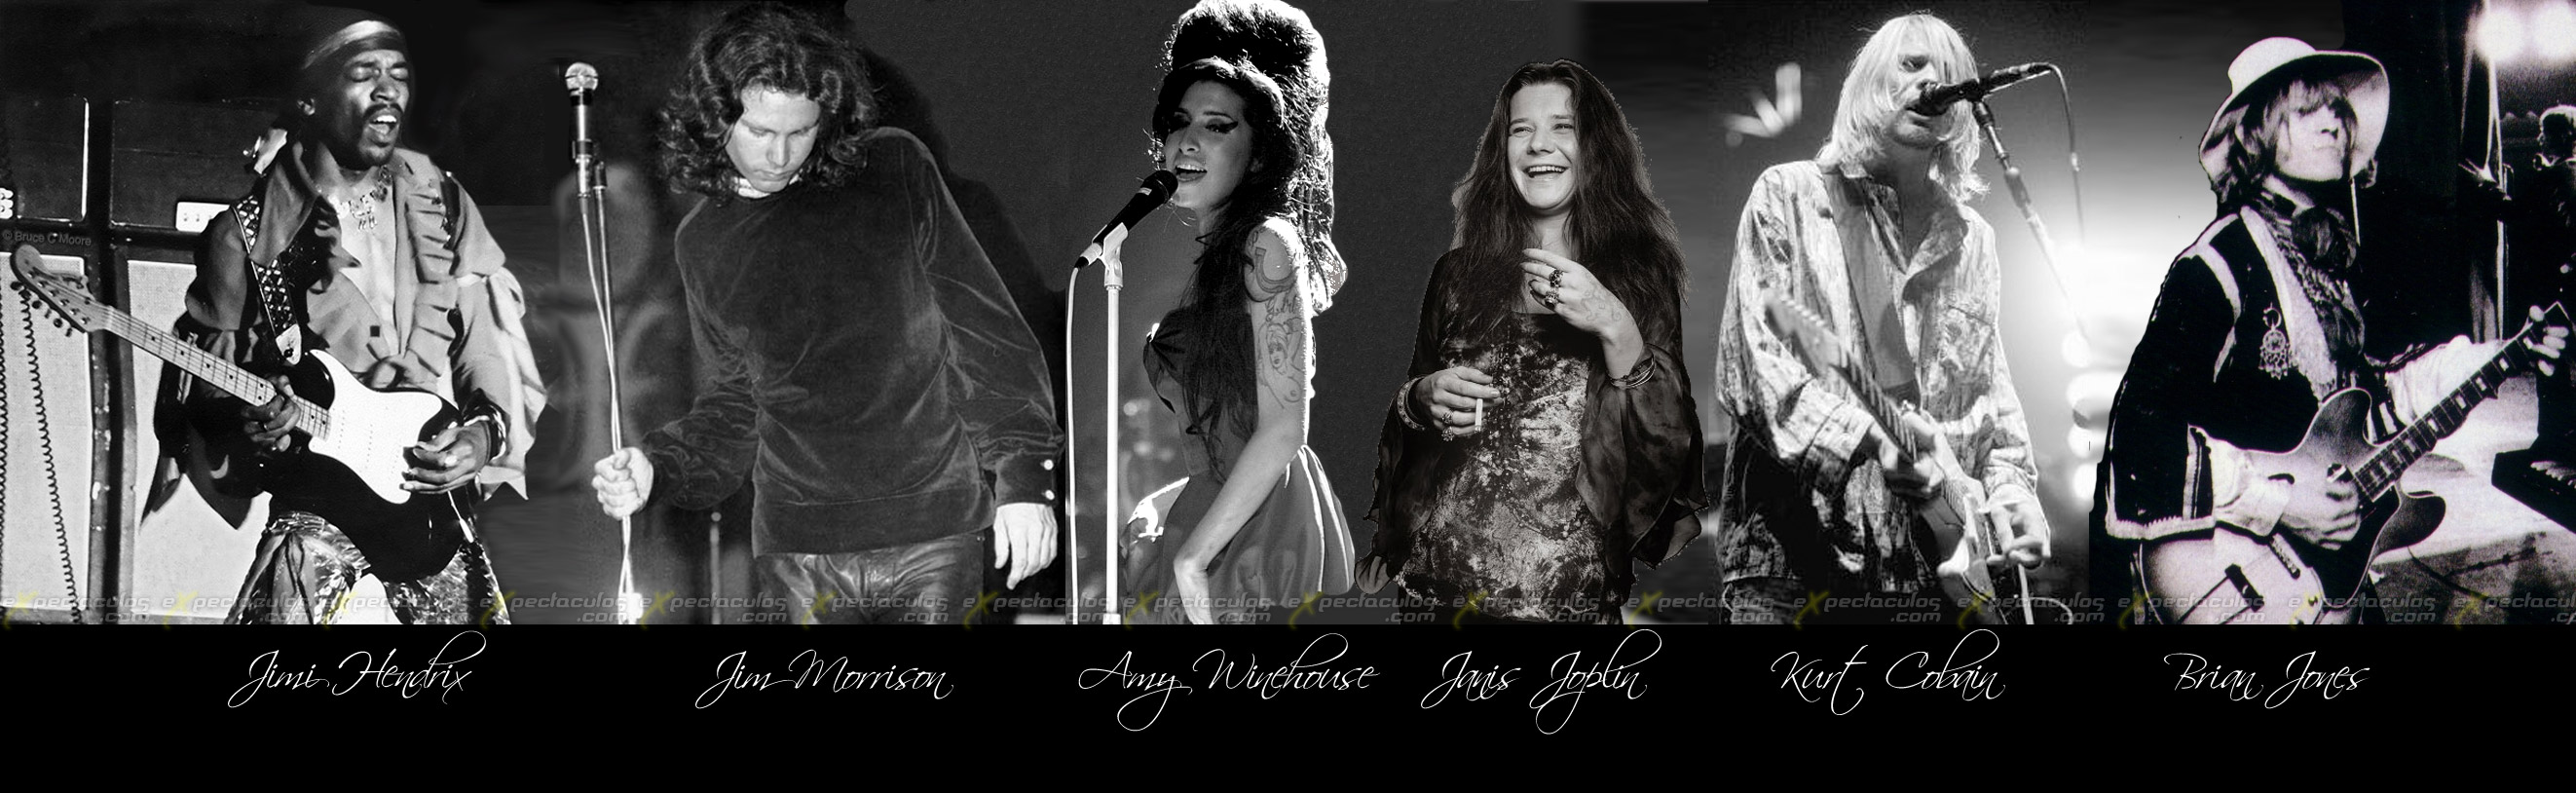 The new 27 club